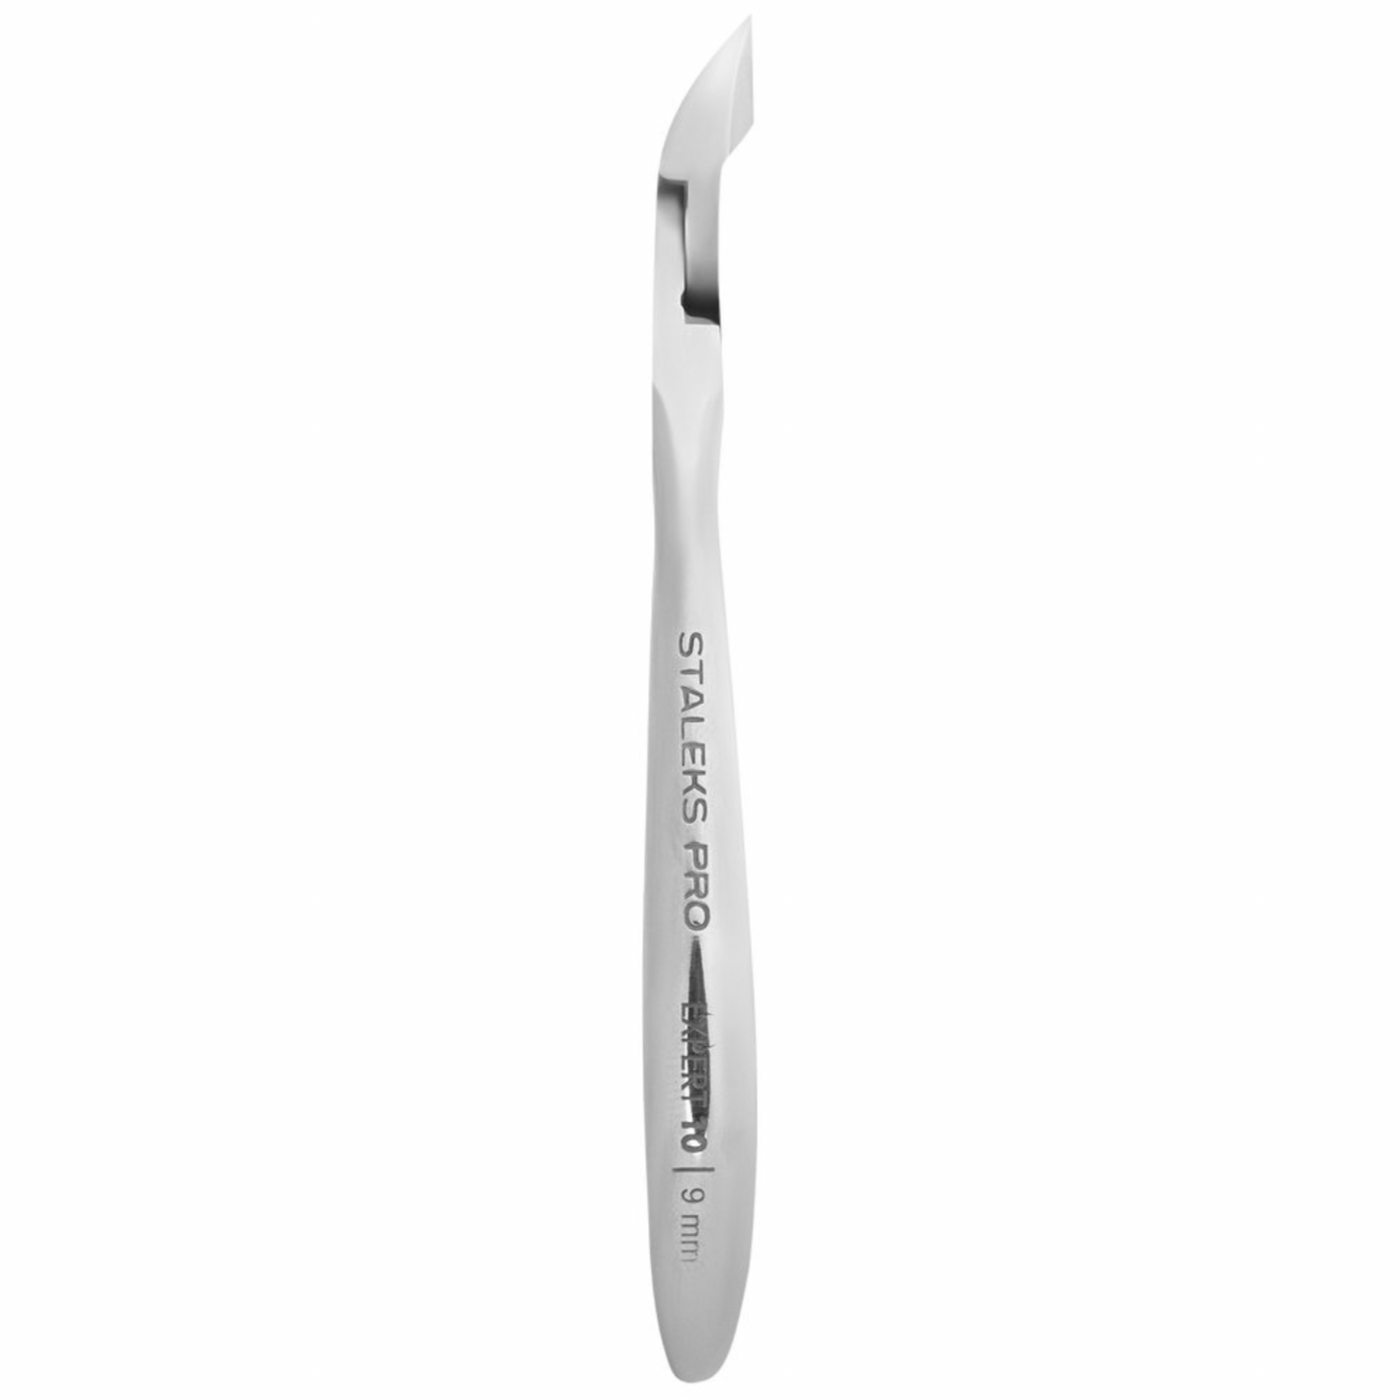 EXPERT 10 | 9mm - Cuticle Nippers